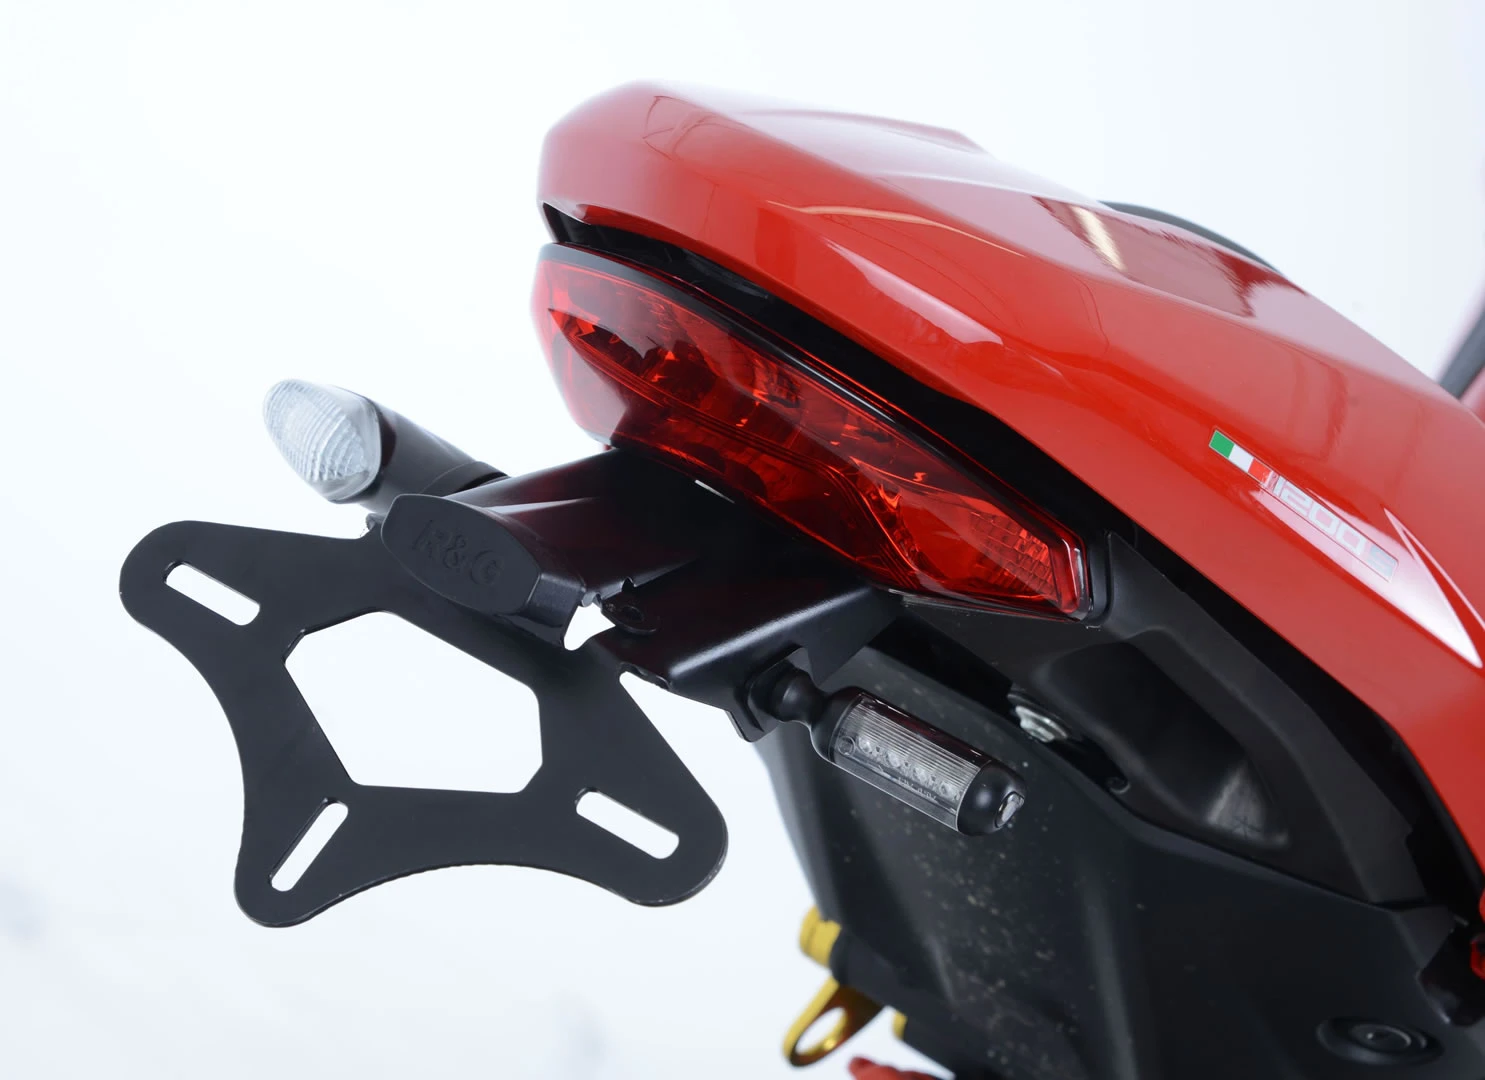 Tail Tidy for Ducati Supersport (S) '17- and Ducati Monster 1200S '14 - '16 models 